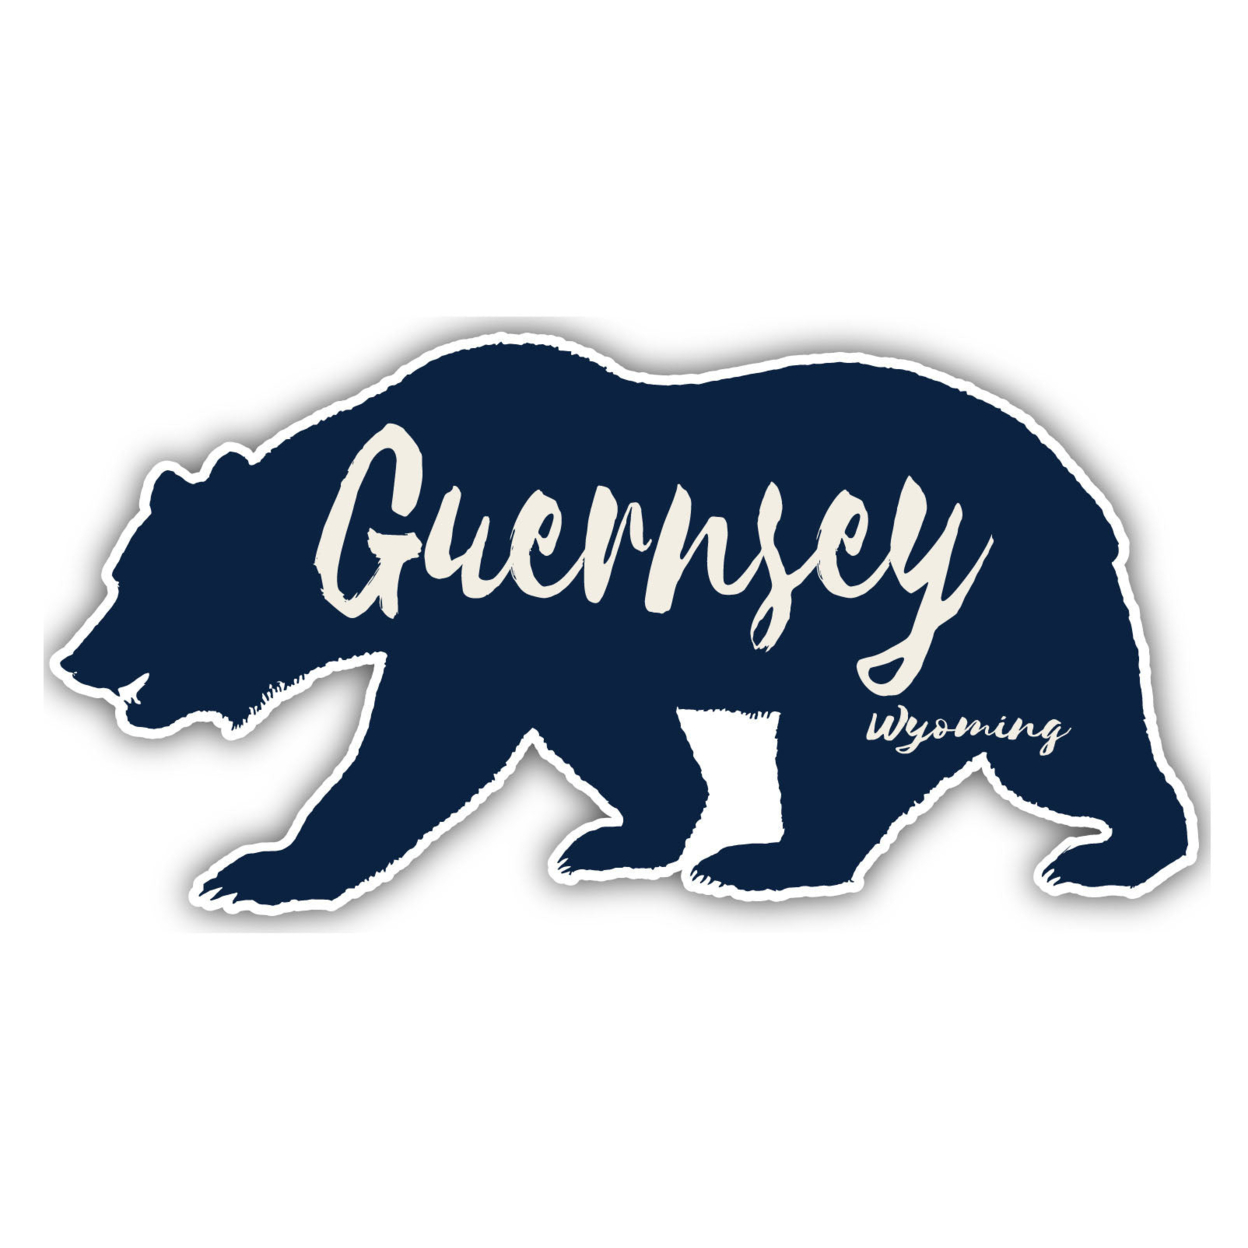 Guernsey Wyoming Souvenir Decorative Stickers (Choose Theme And Size) - 4-Pack, 4-Inch, Bear